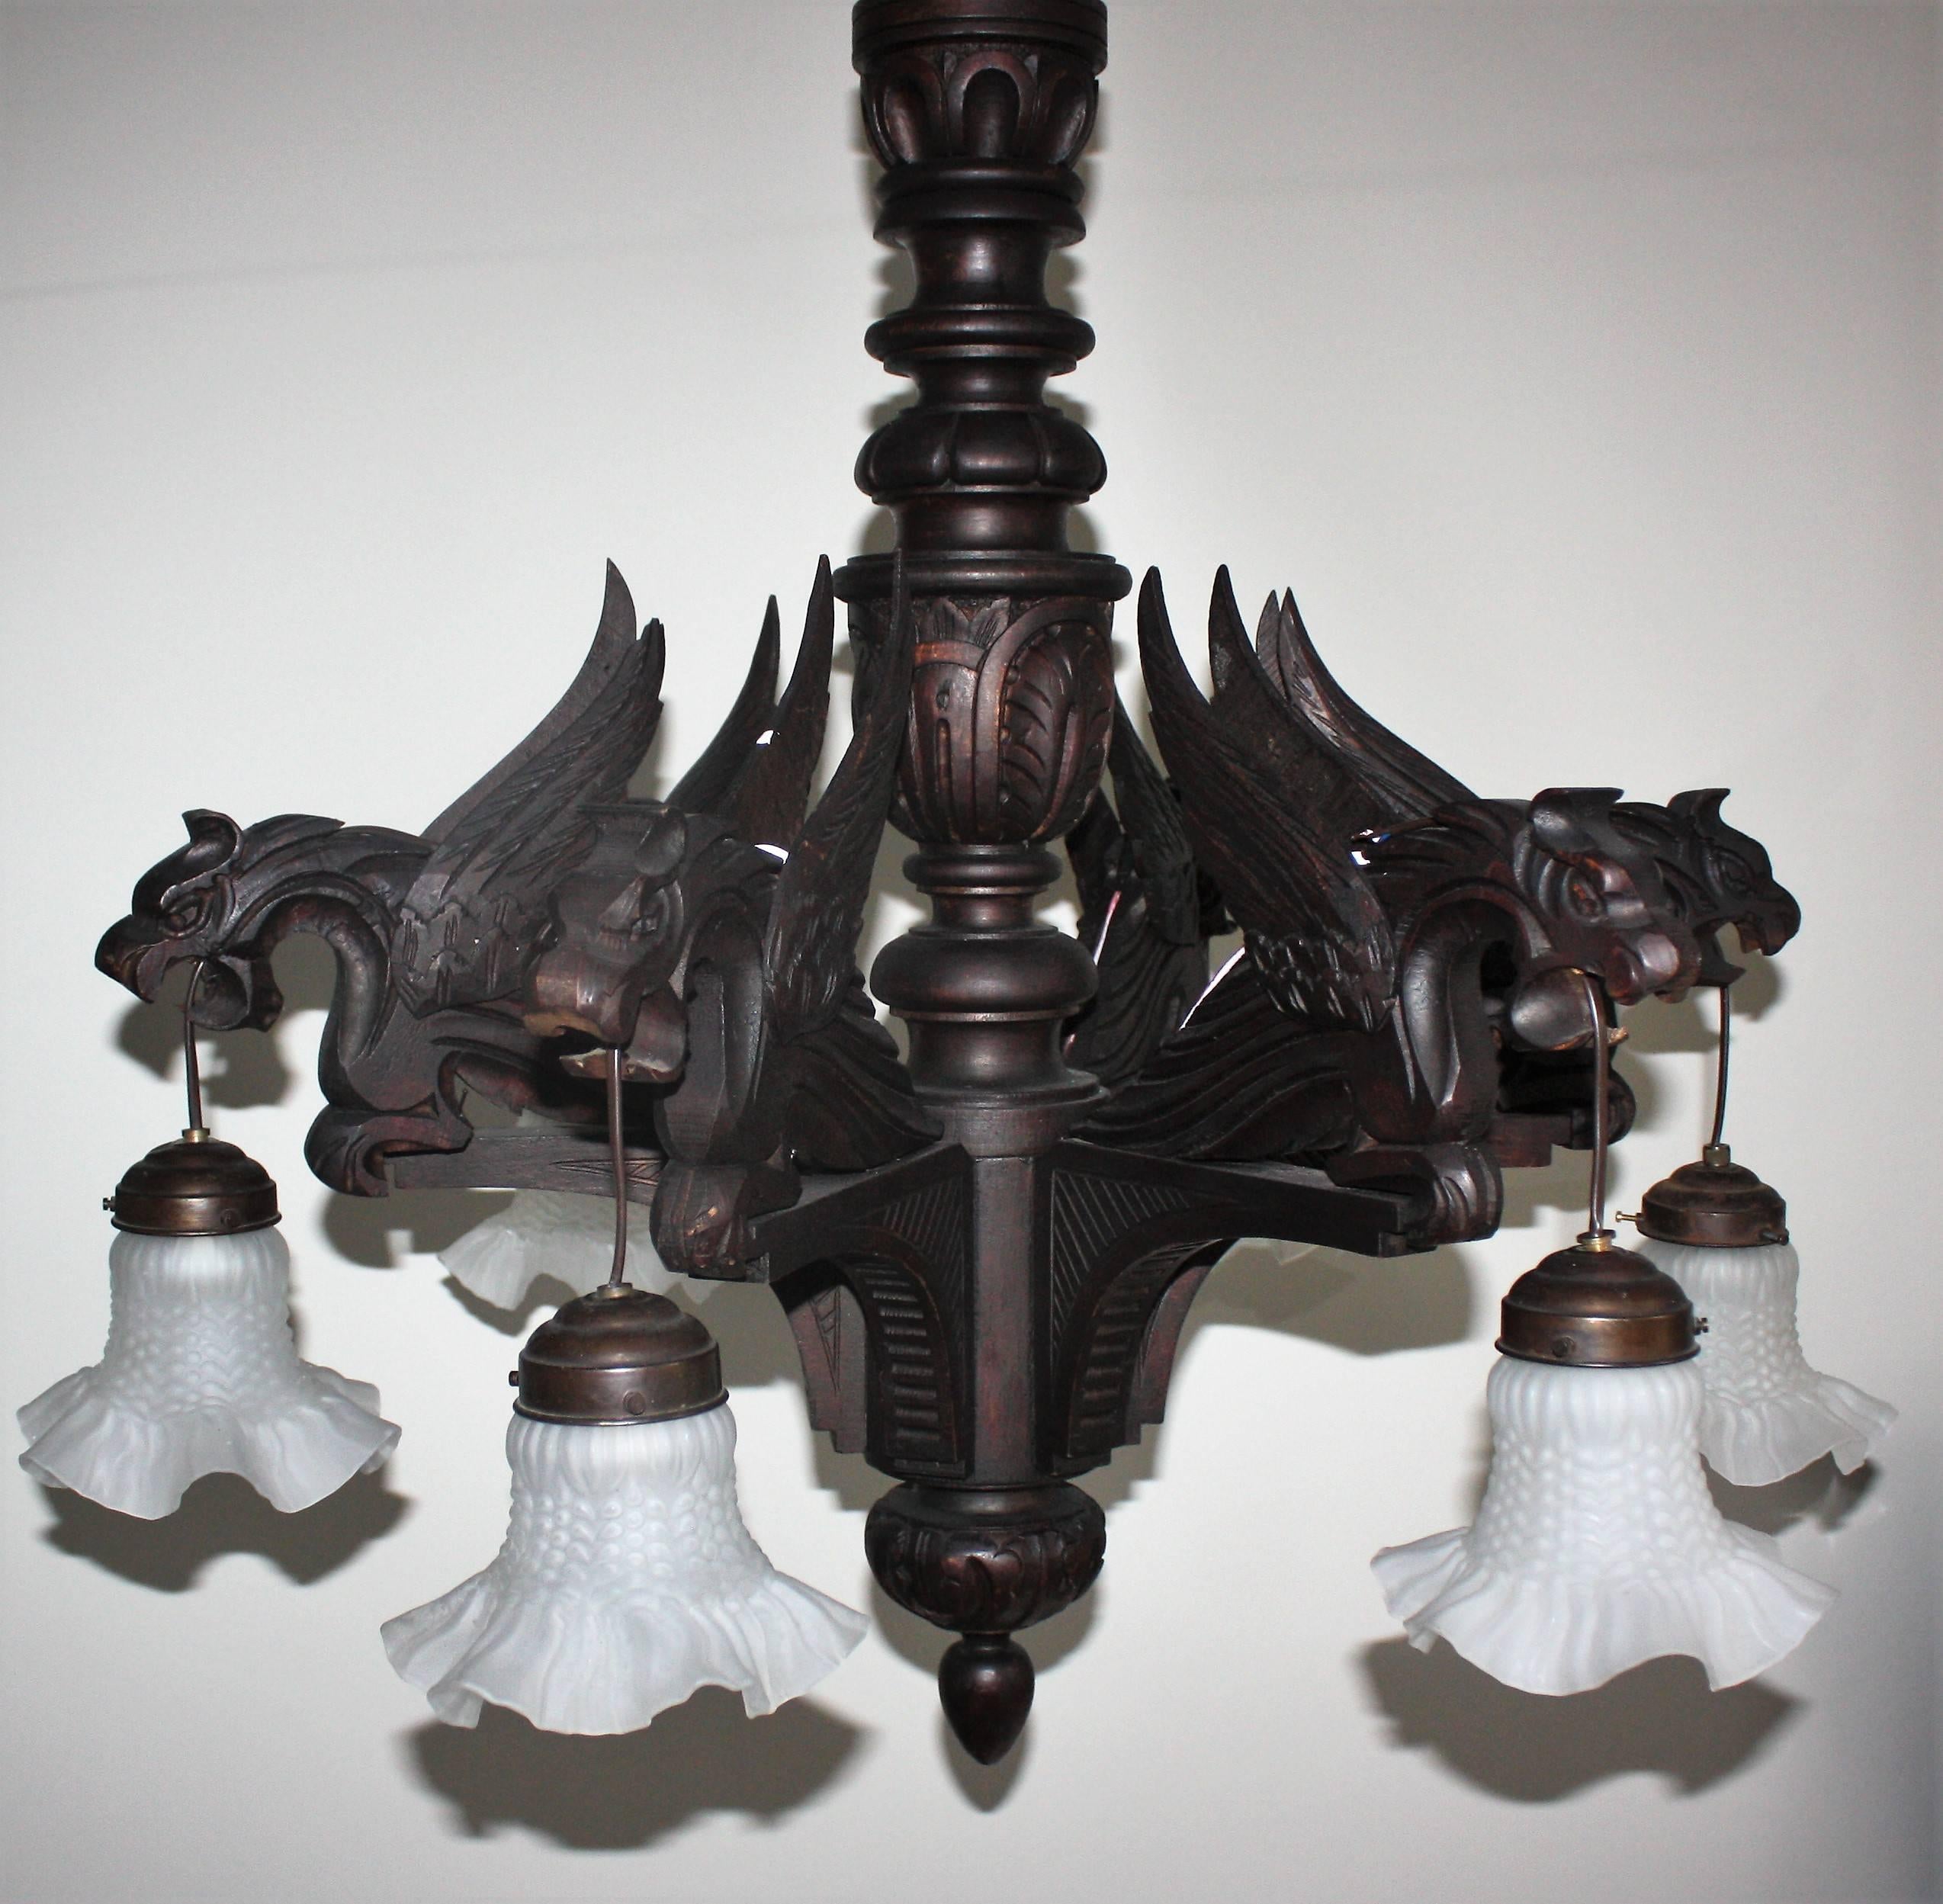 Large hand-carved wooden chandelier with six dragon sculptures and glass shades in the style of gothic or medieval.
Socket: 6 x E 27.